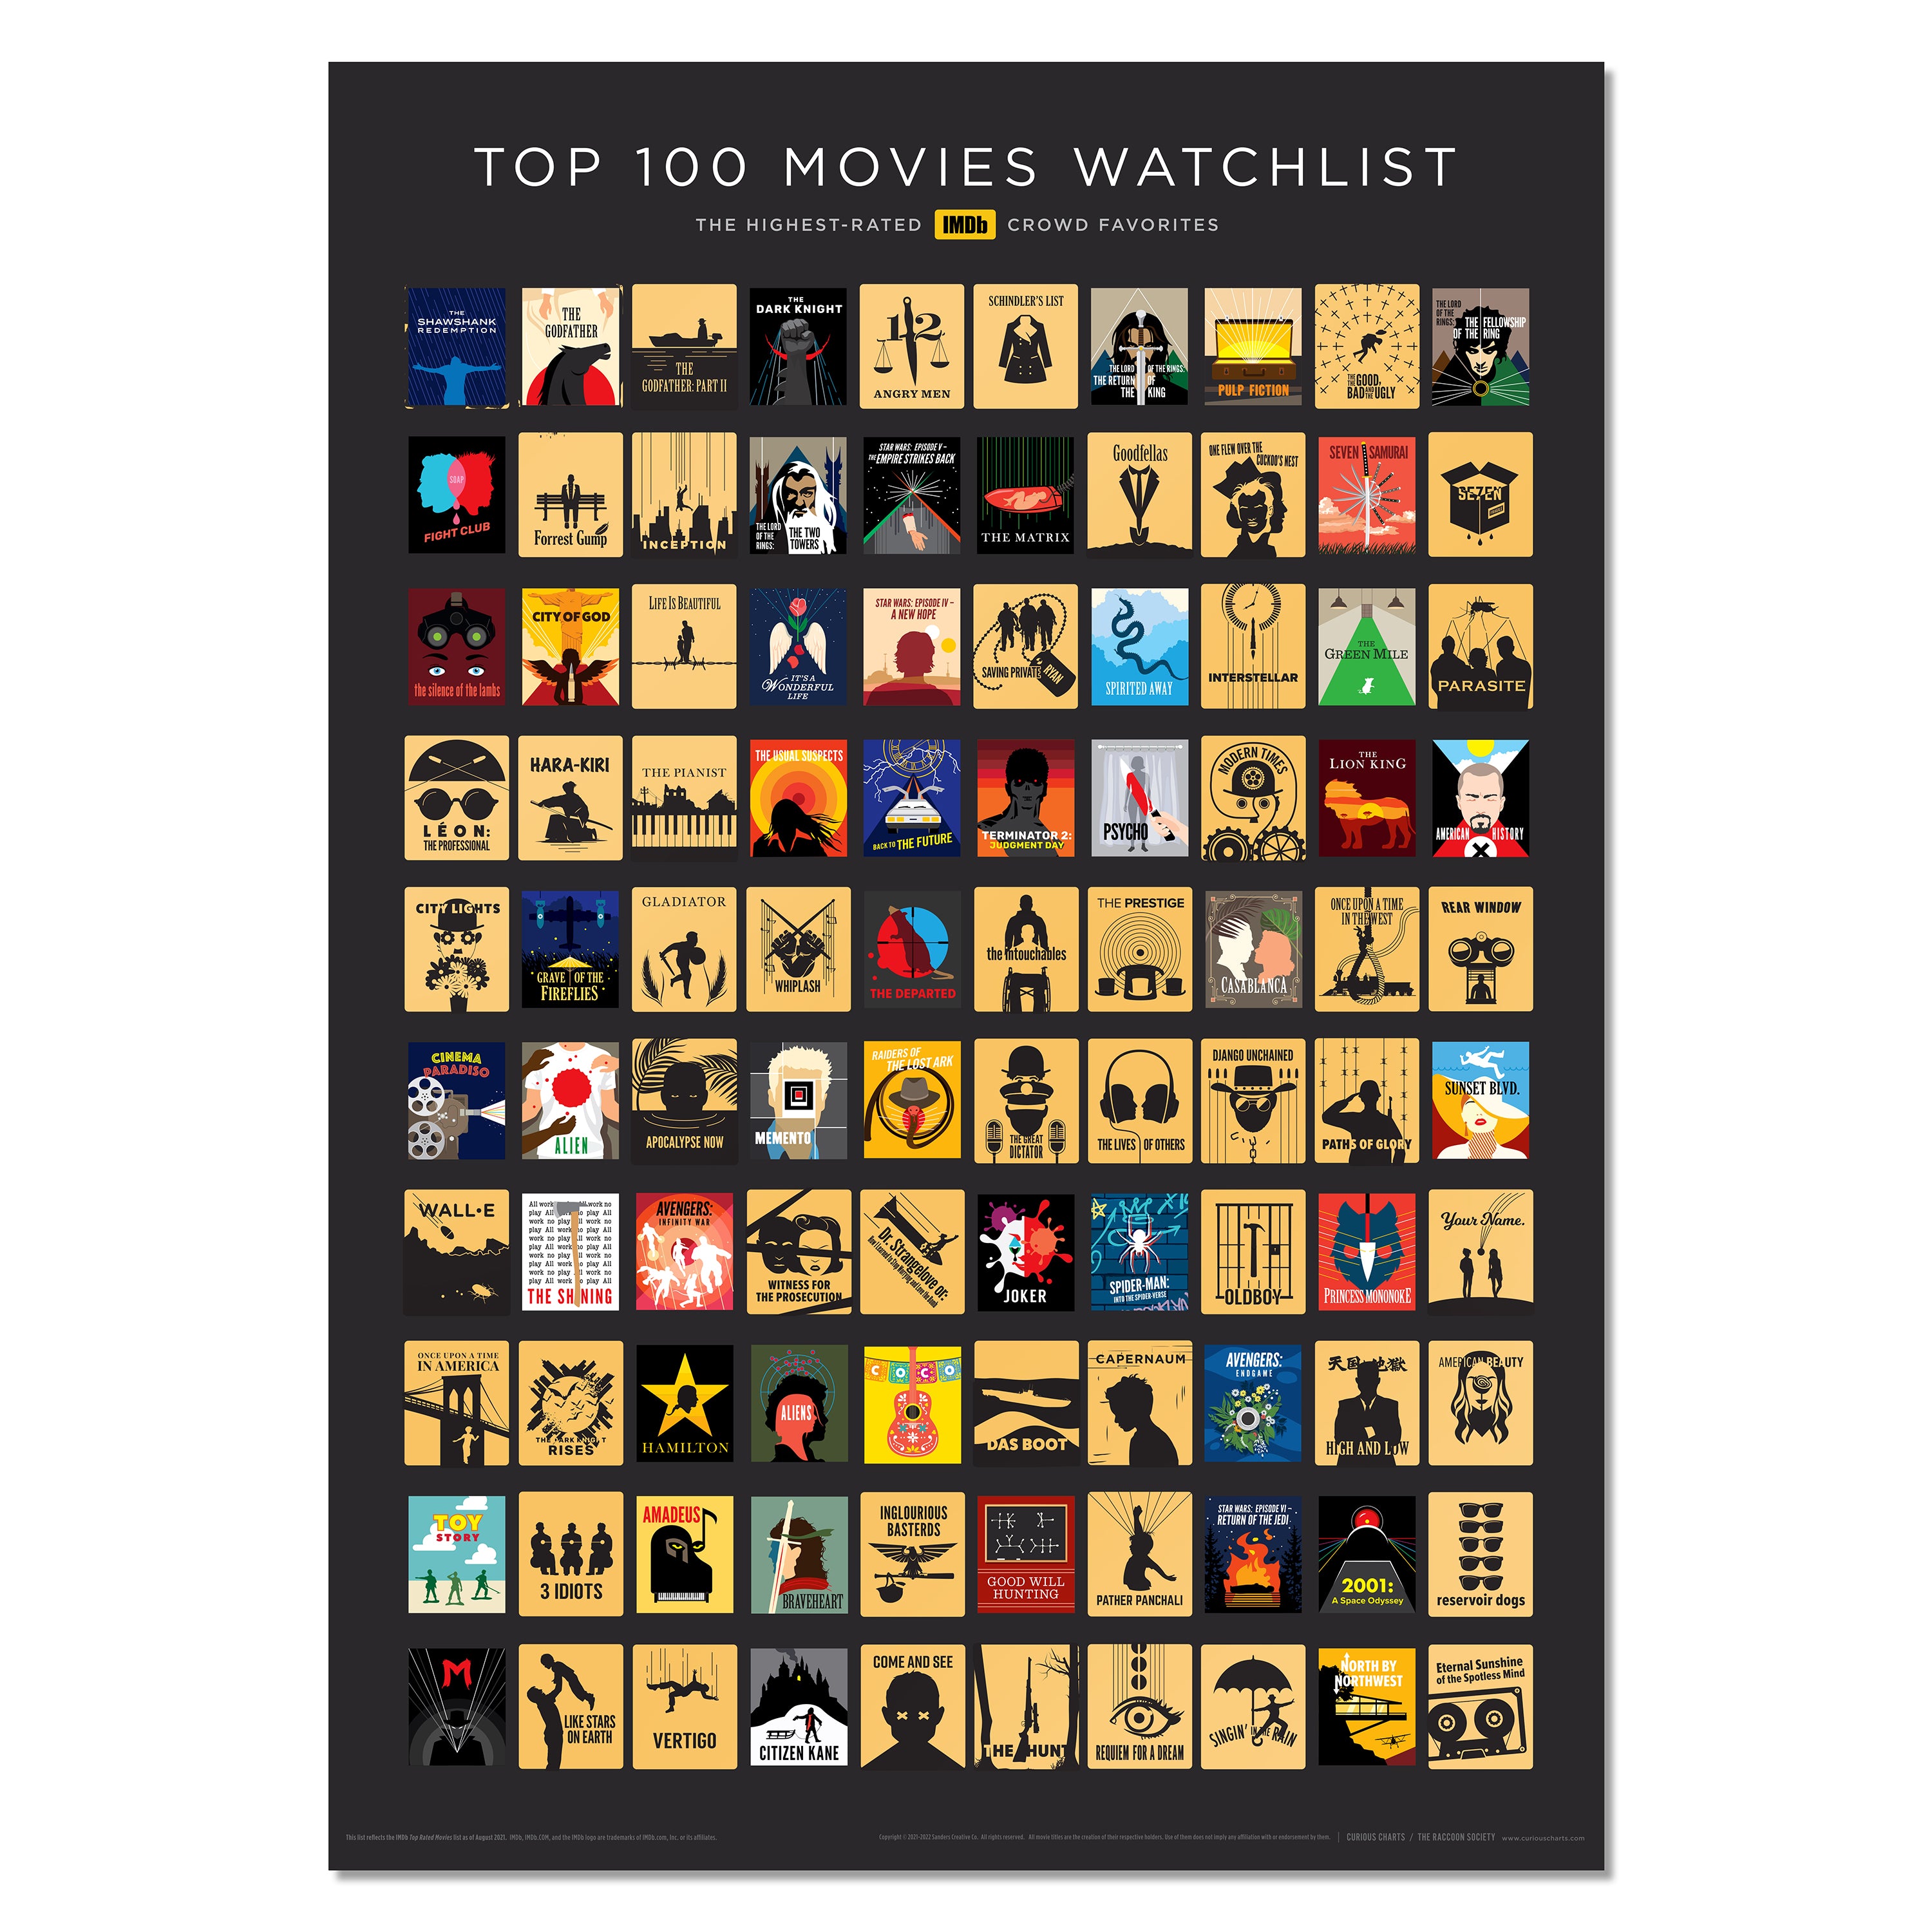 Most Popular Movies And Tv Shows - Sort By Popularity(IMDb)